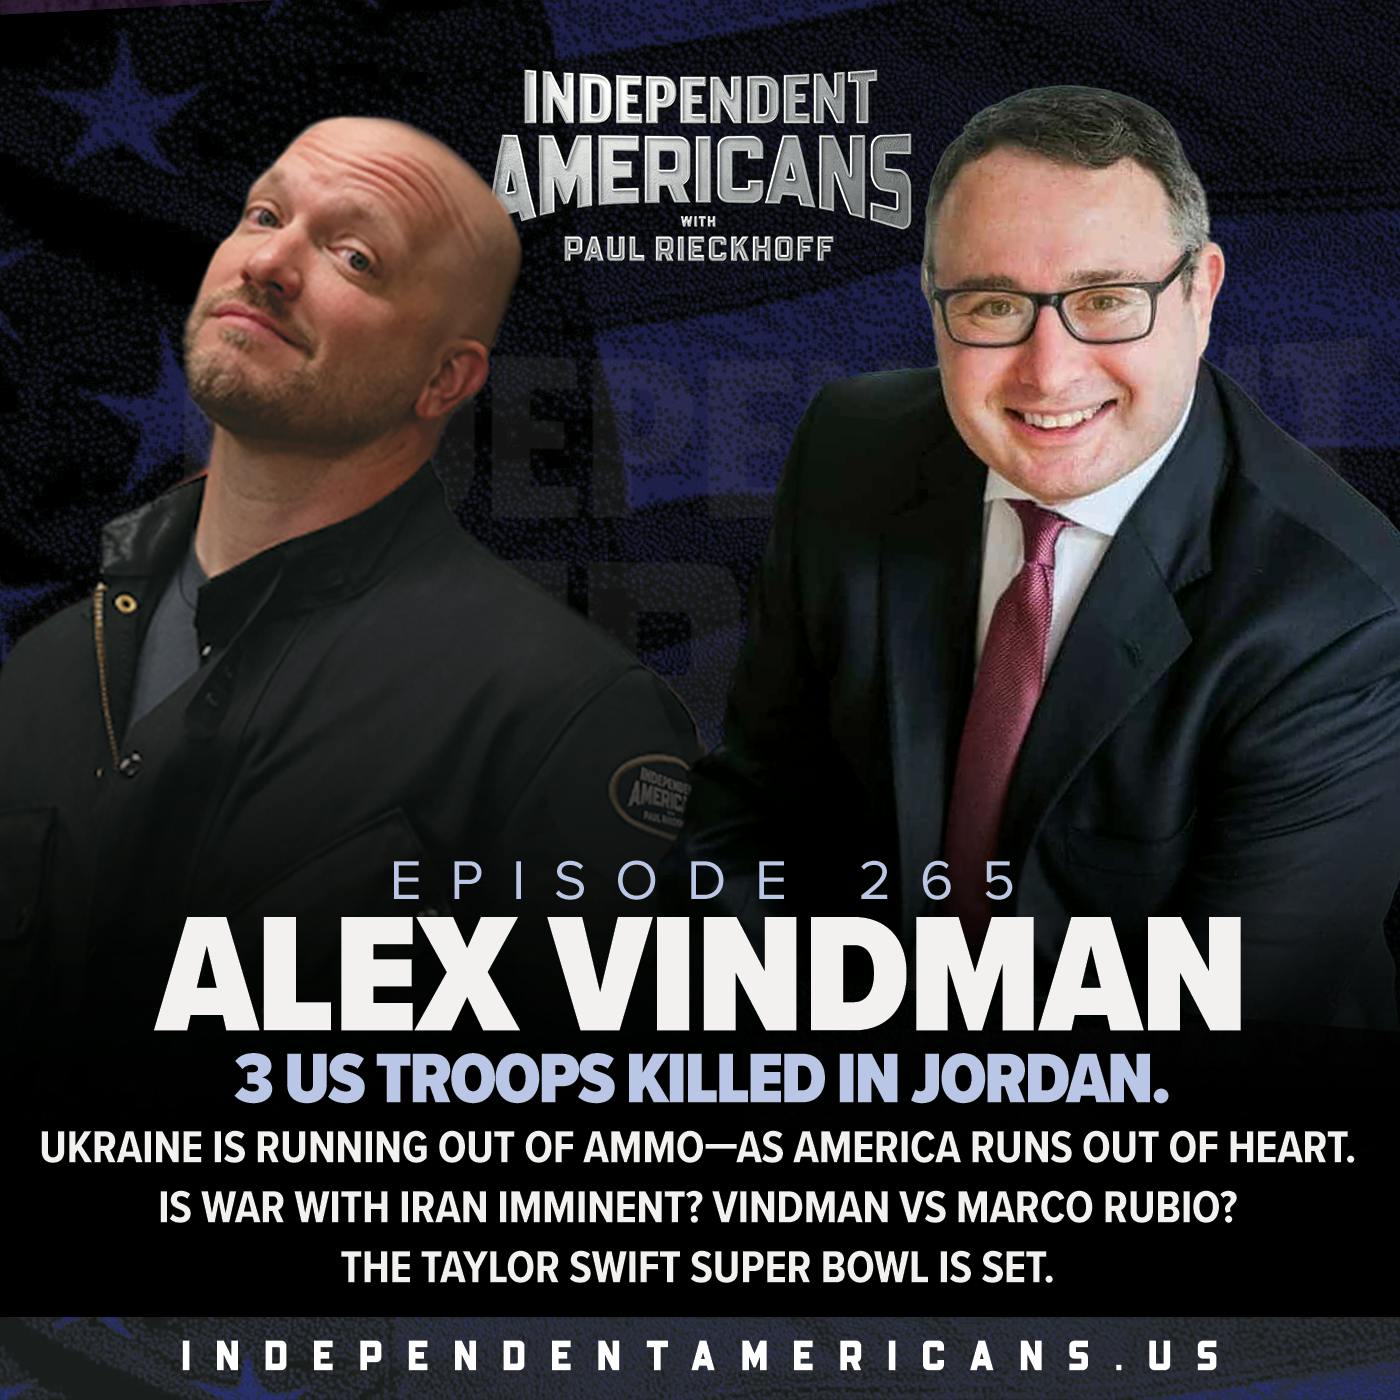 265. Alex Vindman. Three US Troops Killed in Jordan. Ukraine is Running Out of Ammo—as America Runs Out of Heart. Is War with Iran Imminent? Vindman vs Marco Rubio? The Taylor Swift Super Bowl is Set.